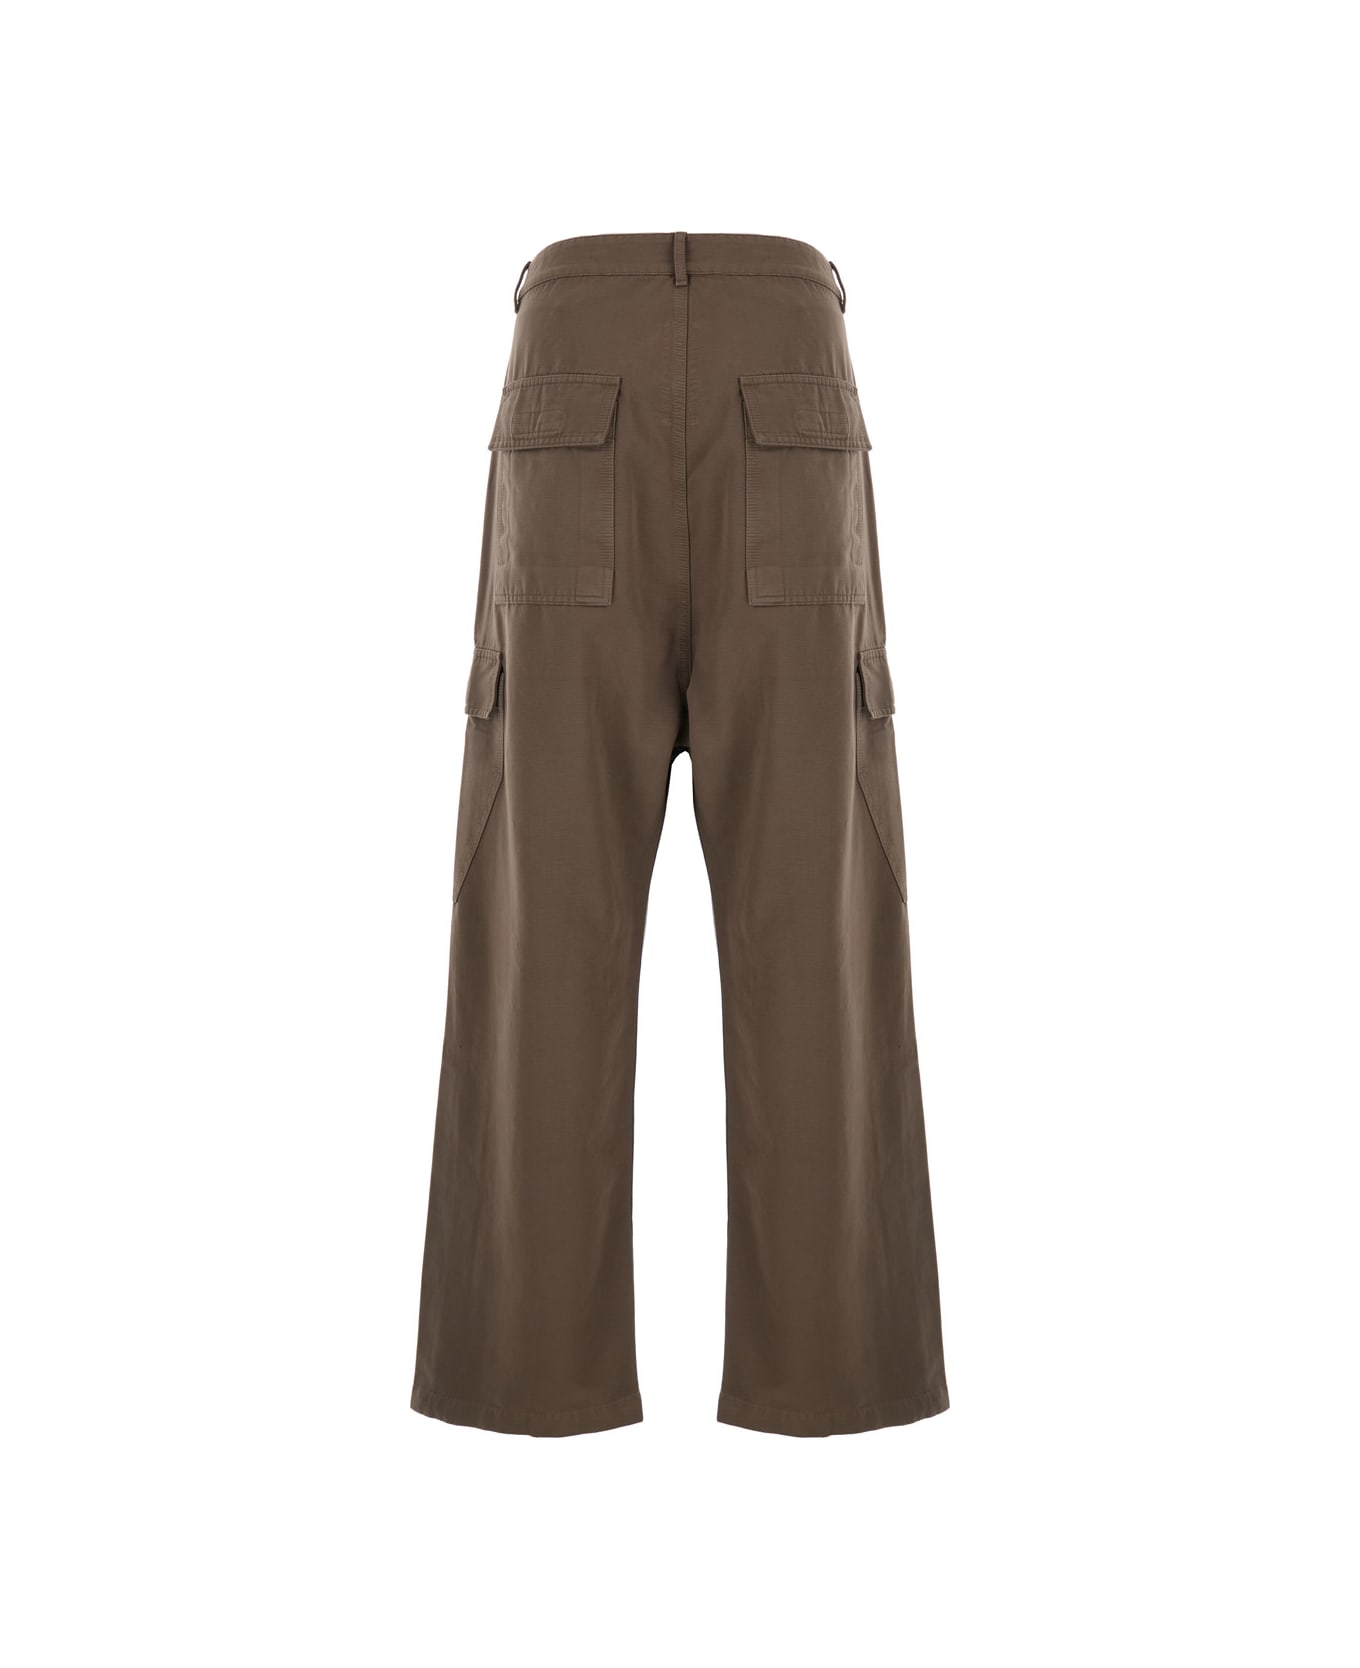 DRKSHDW Cotton Twill Cargo Trousers - Brown